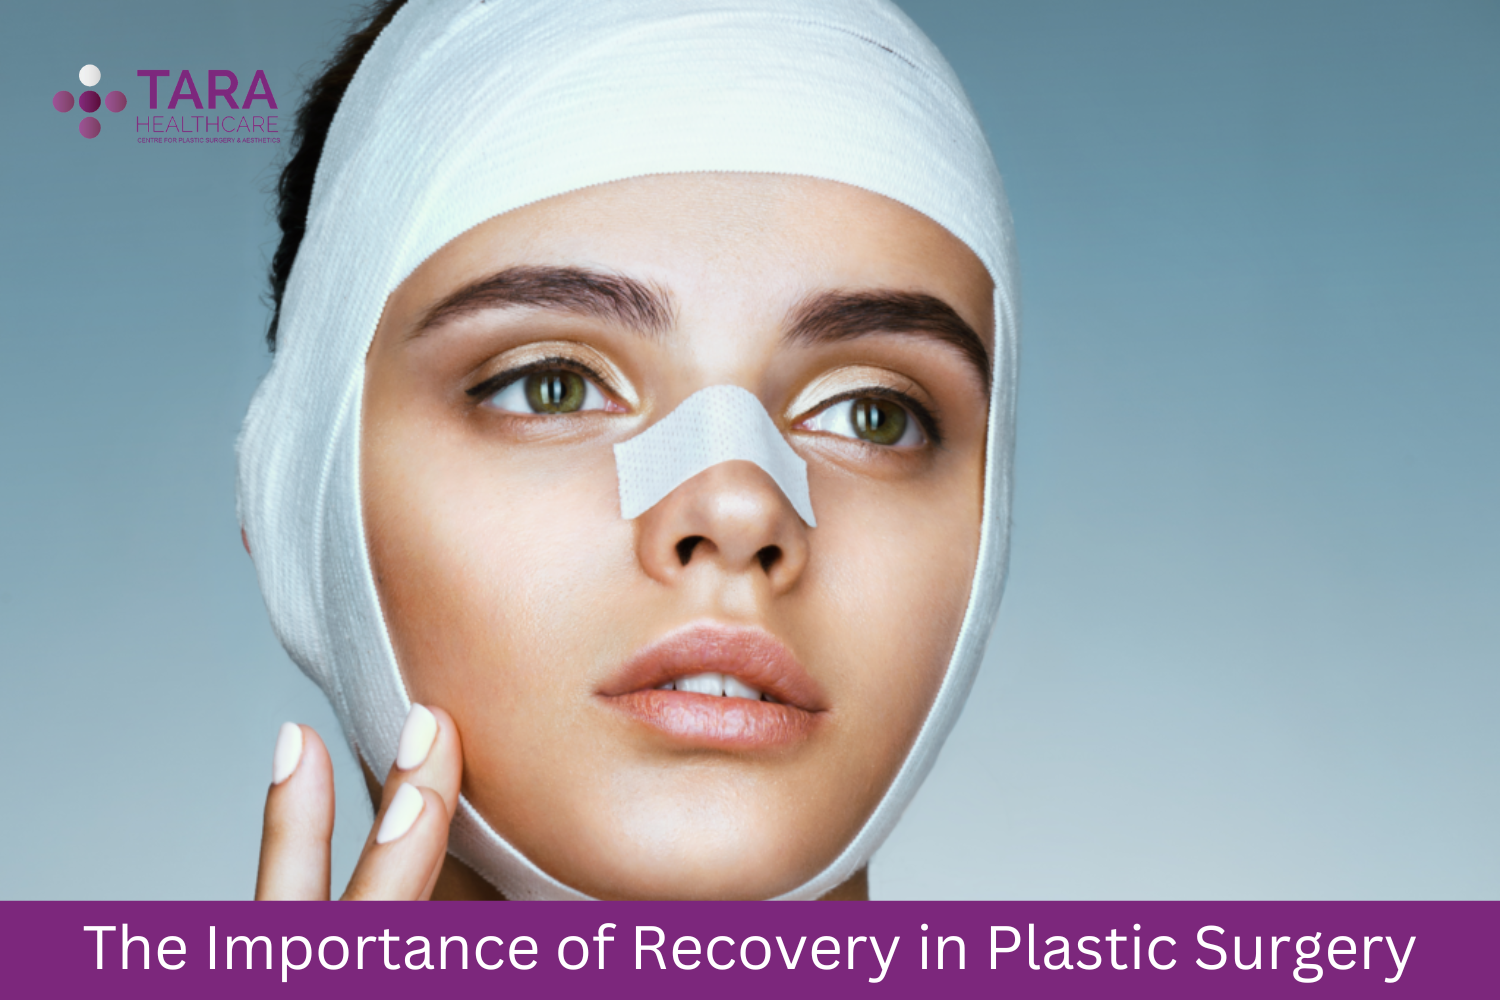 The Importance of Recovery in Plastic Surgery - Tara Healthcare